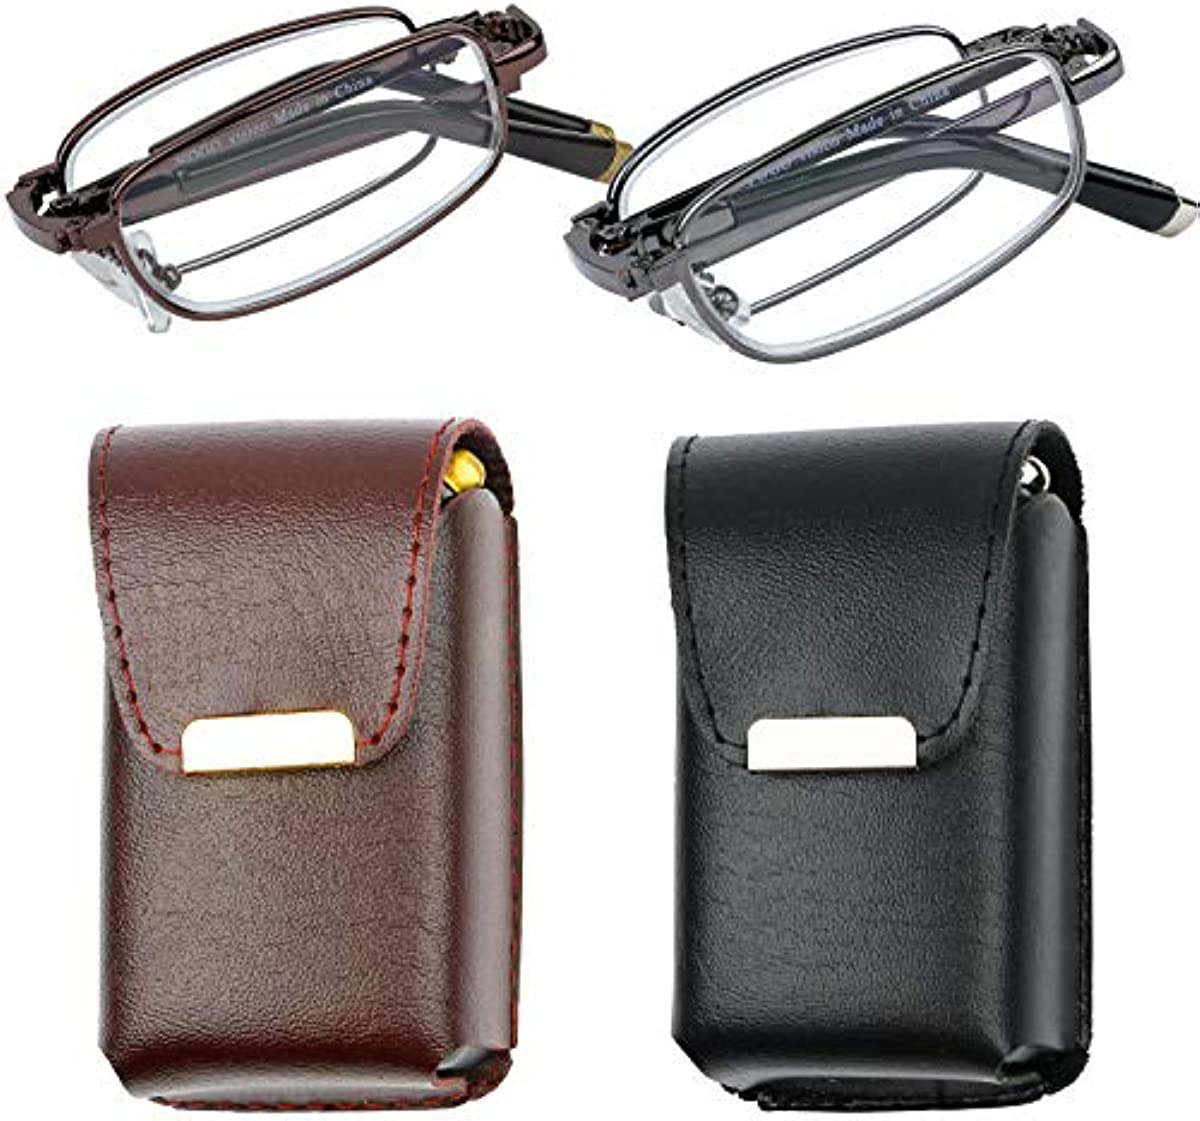 Reading Glasses Set of 2 Fashion Folding Readers with Leather Cases Glasses for Reading for Men and Women